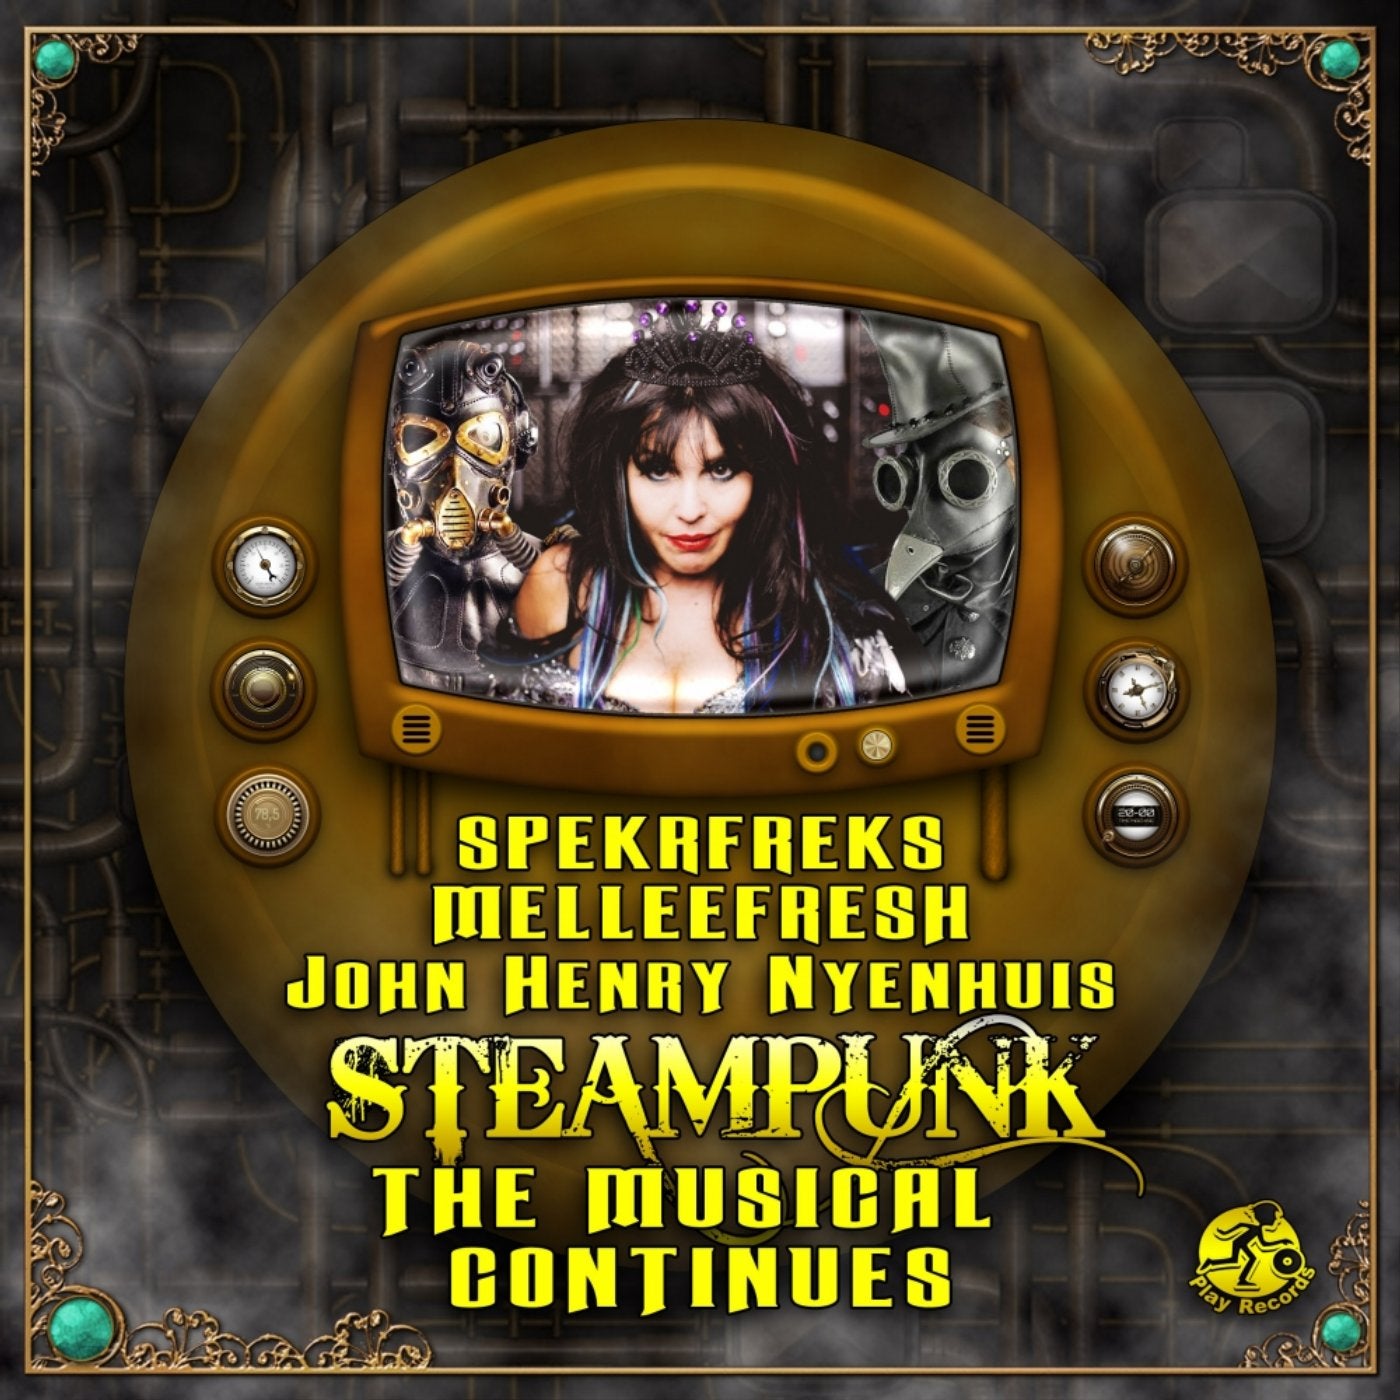 Steampunk: The Musical Continues